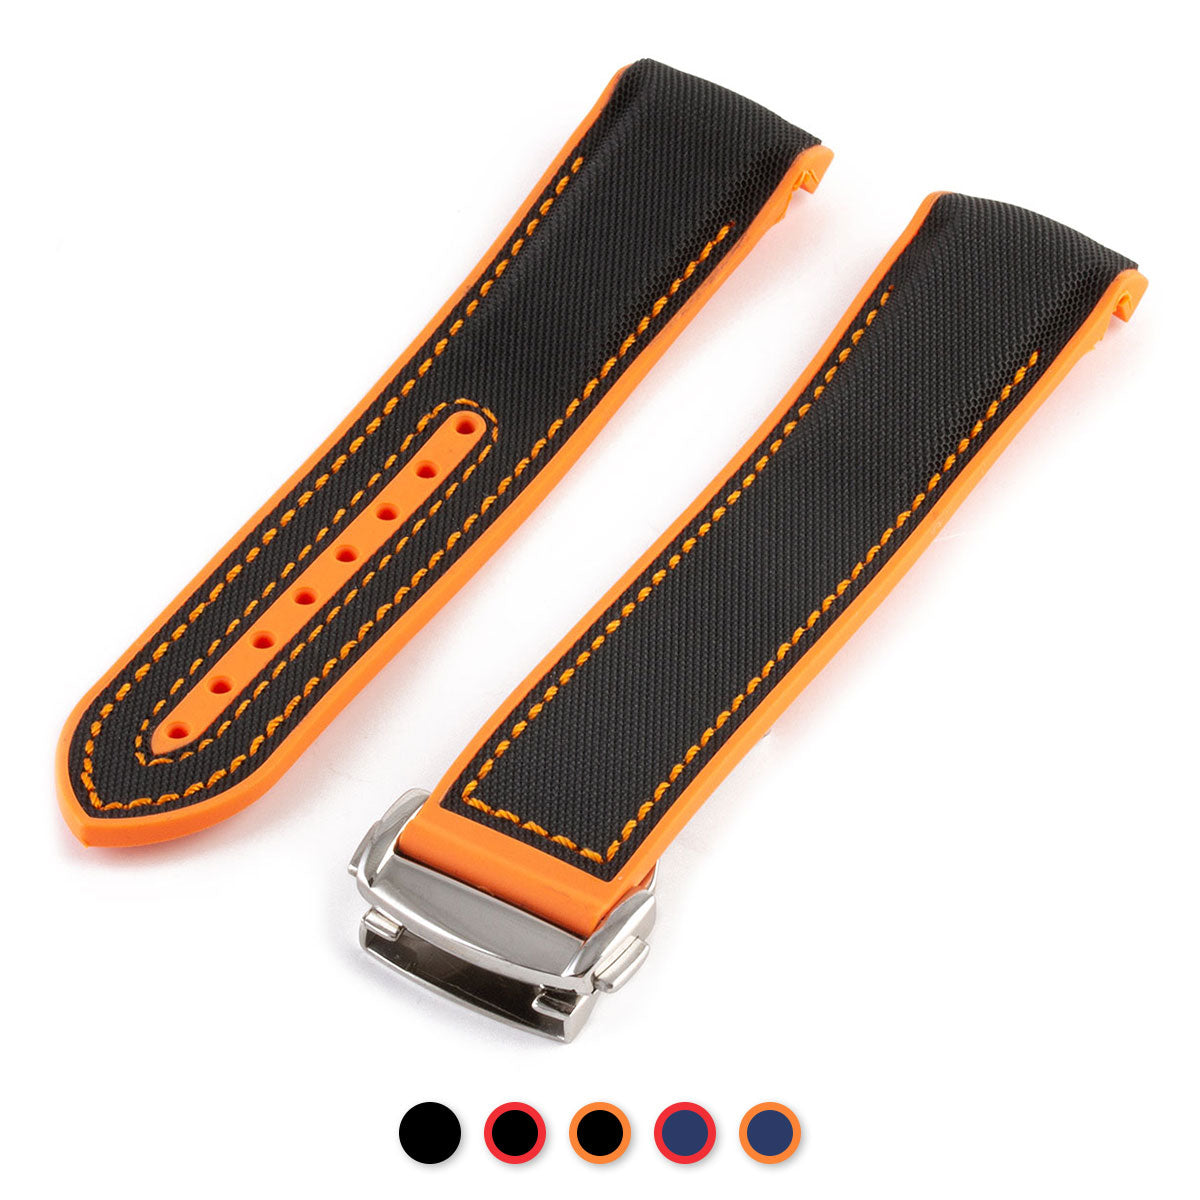 Omega Speedmaster / Seamaster - Integrated rubber watch band - Stitched with cordura effect (black, blue, red, orange)